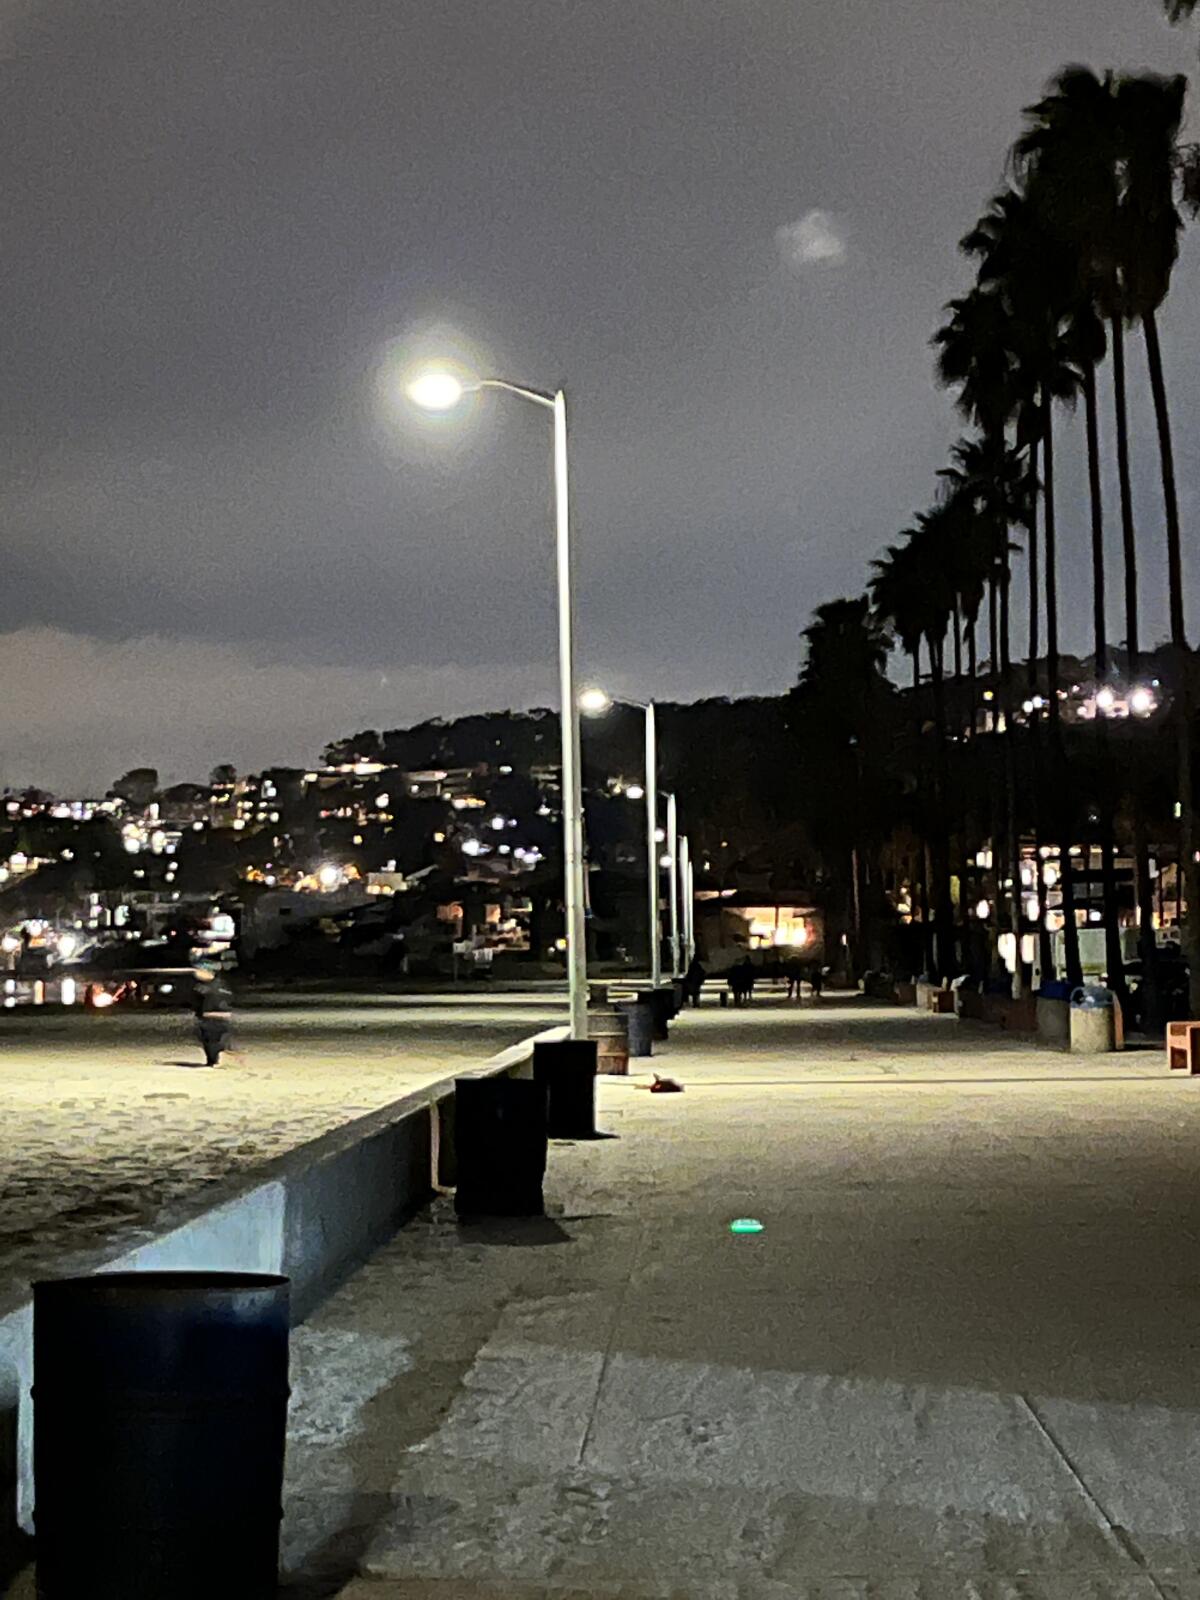 In this photo taken March 3, all the lights are on along the La Jolla Shores boardwalk after being dark for months.